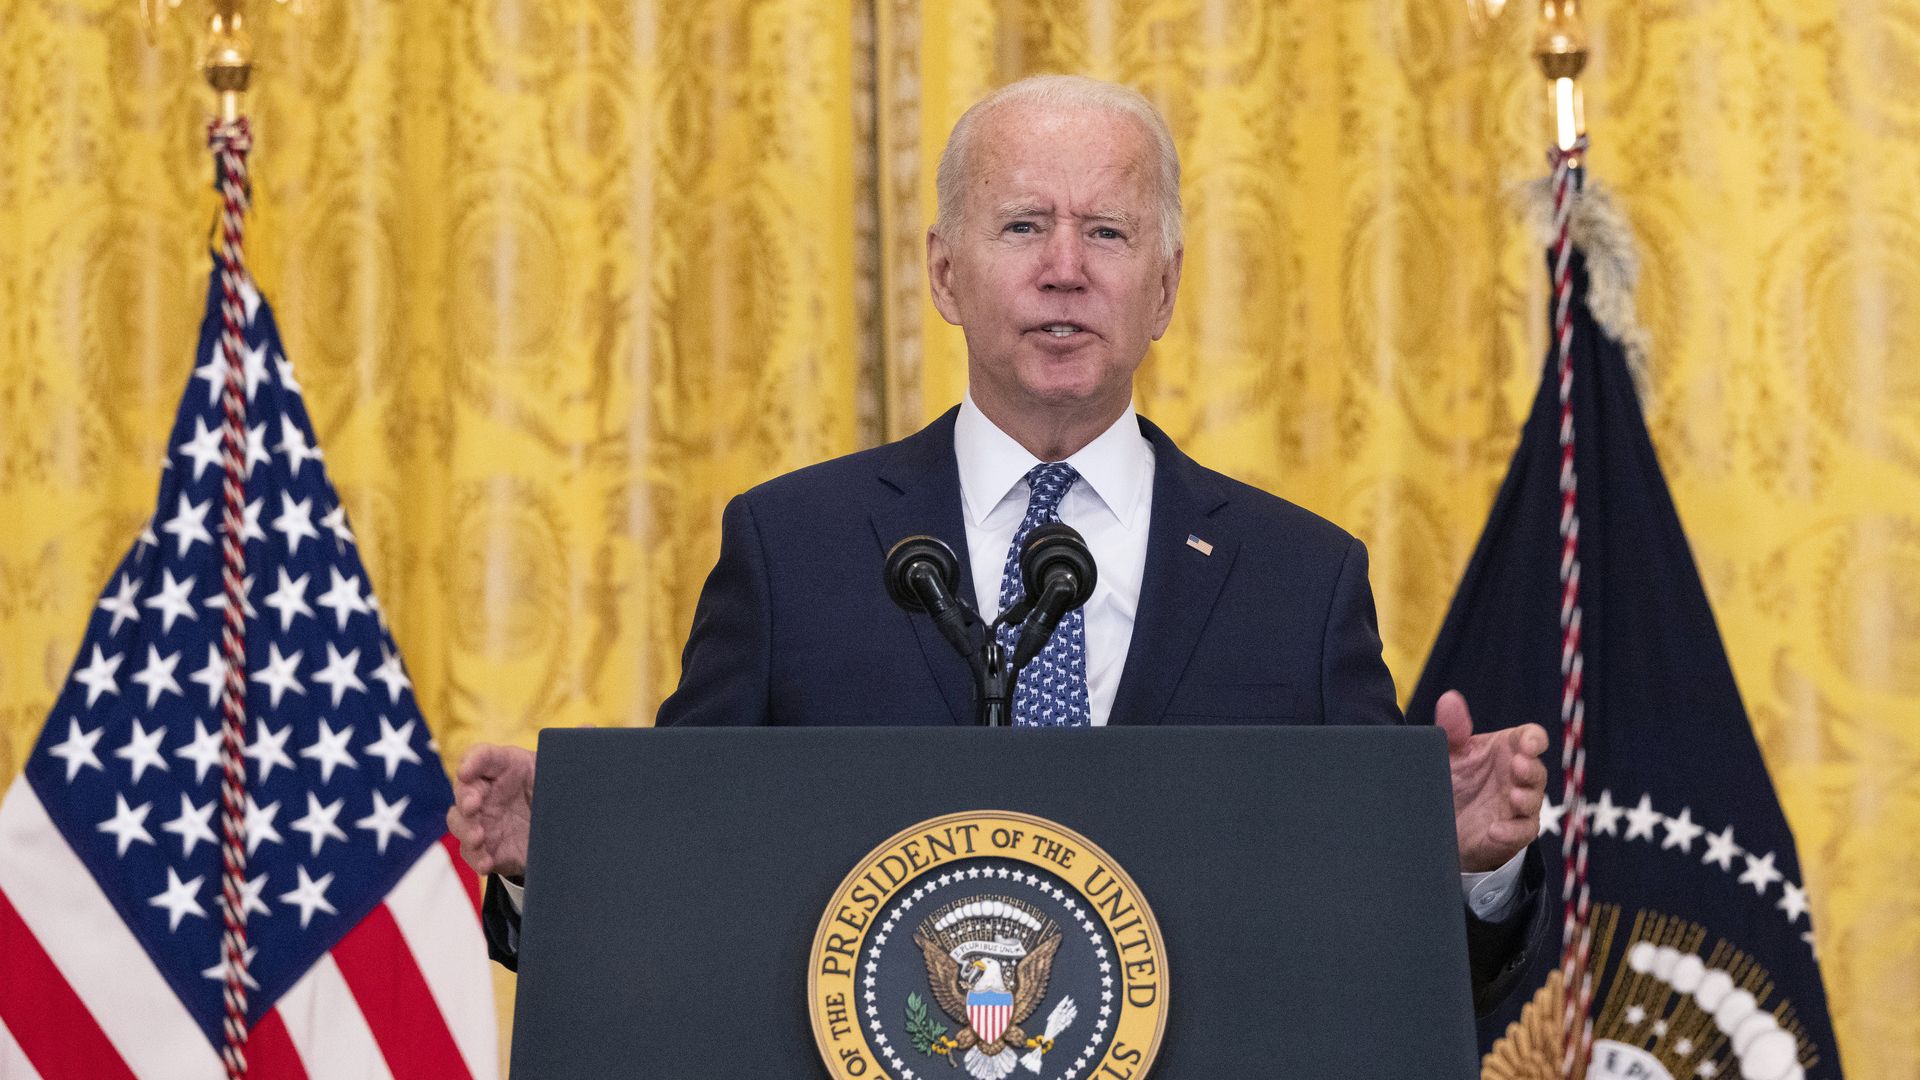 President Joe Biden speaks on workers rights and labor unions in the East Room at the White House on September 08, 2021